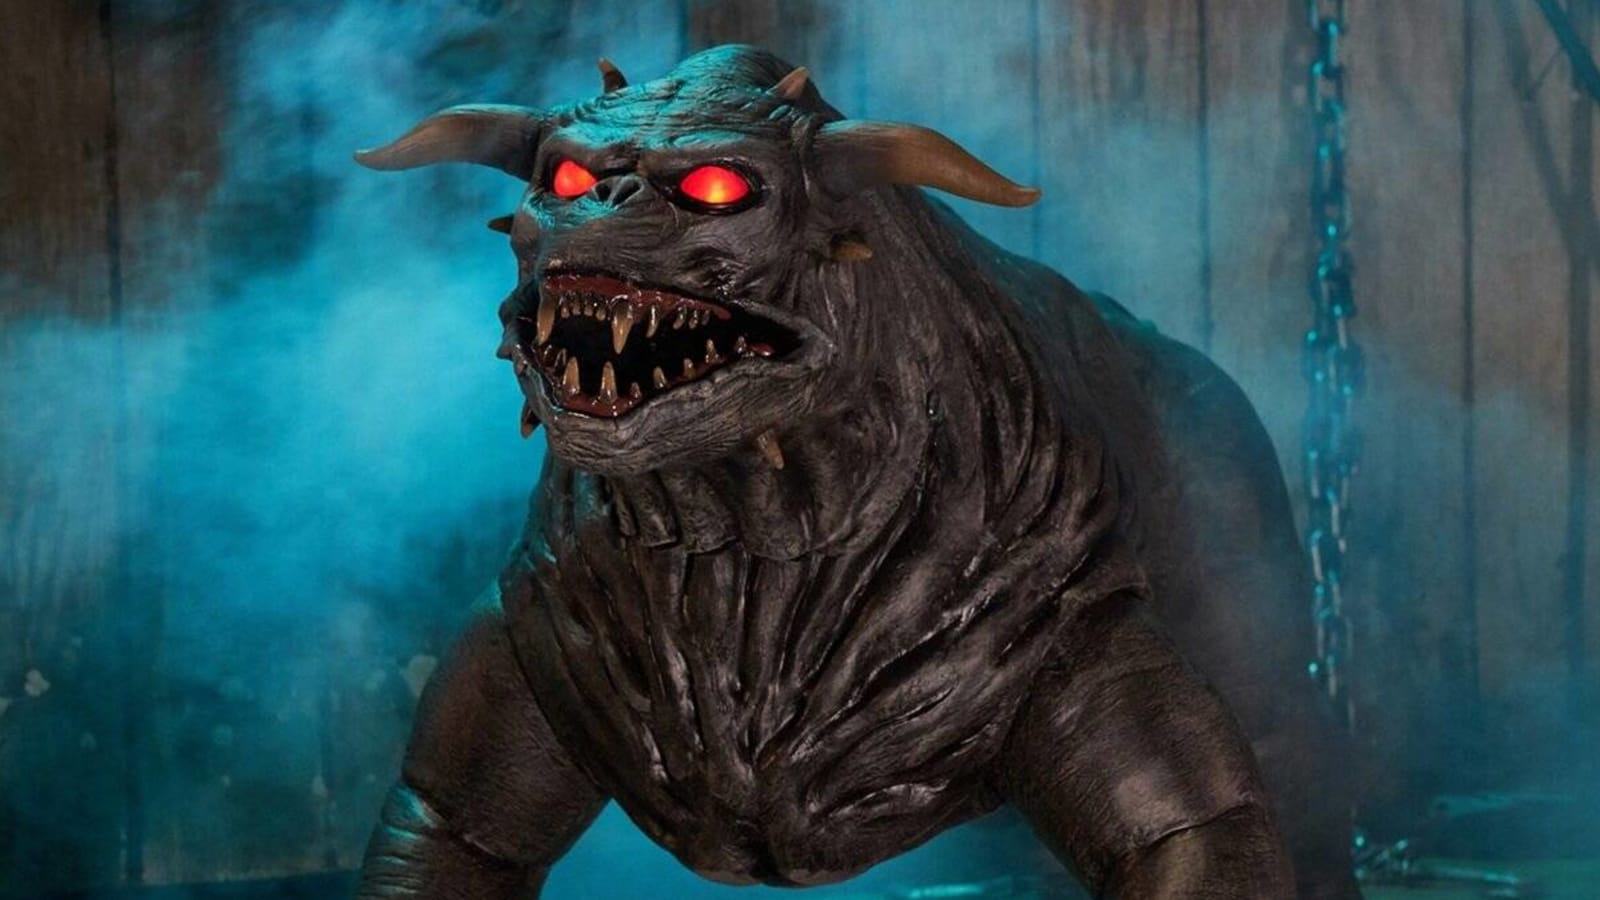 GHOSTBUSTERS Life-Size Terror Dogs Return to Spirit Halloween This Year